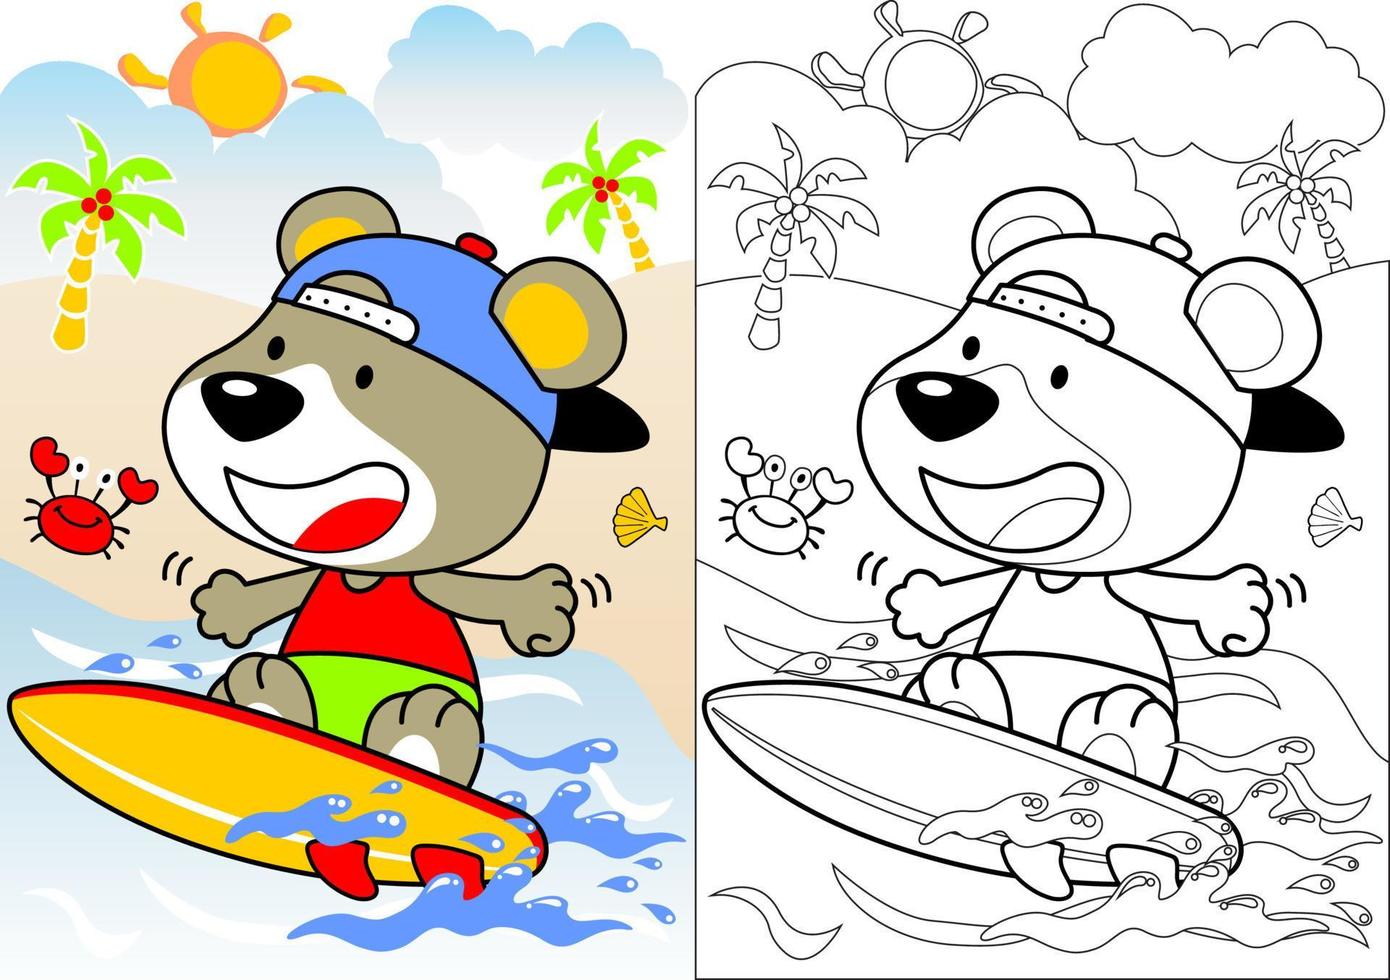 surfing time with little bear, vector cartoon, coloring book or page